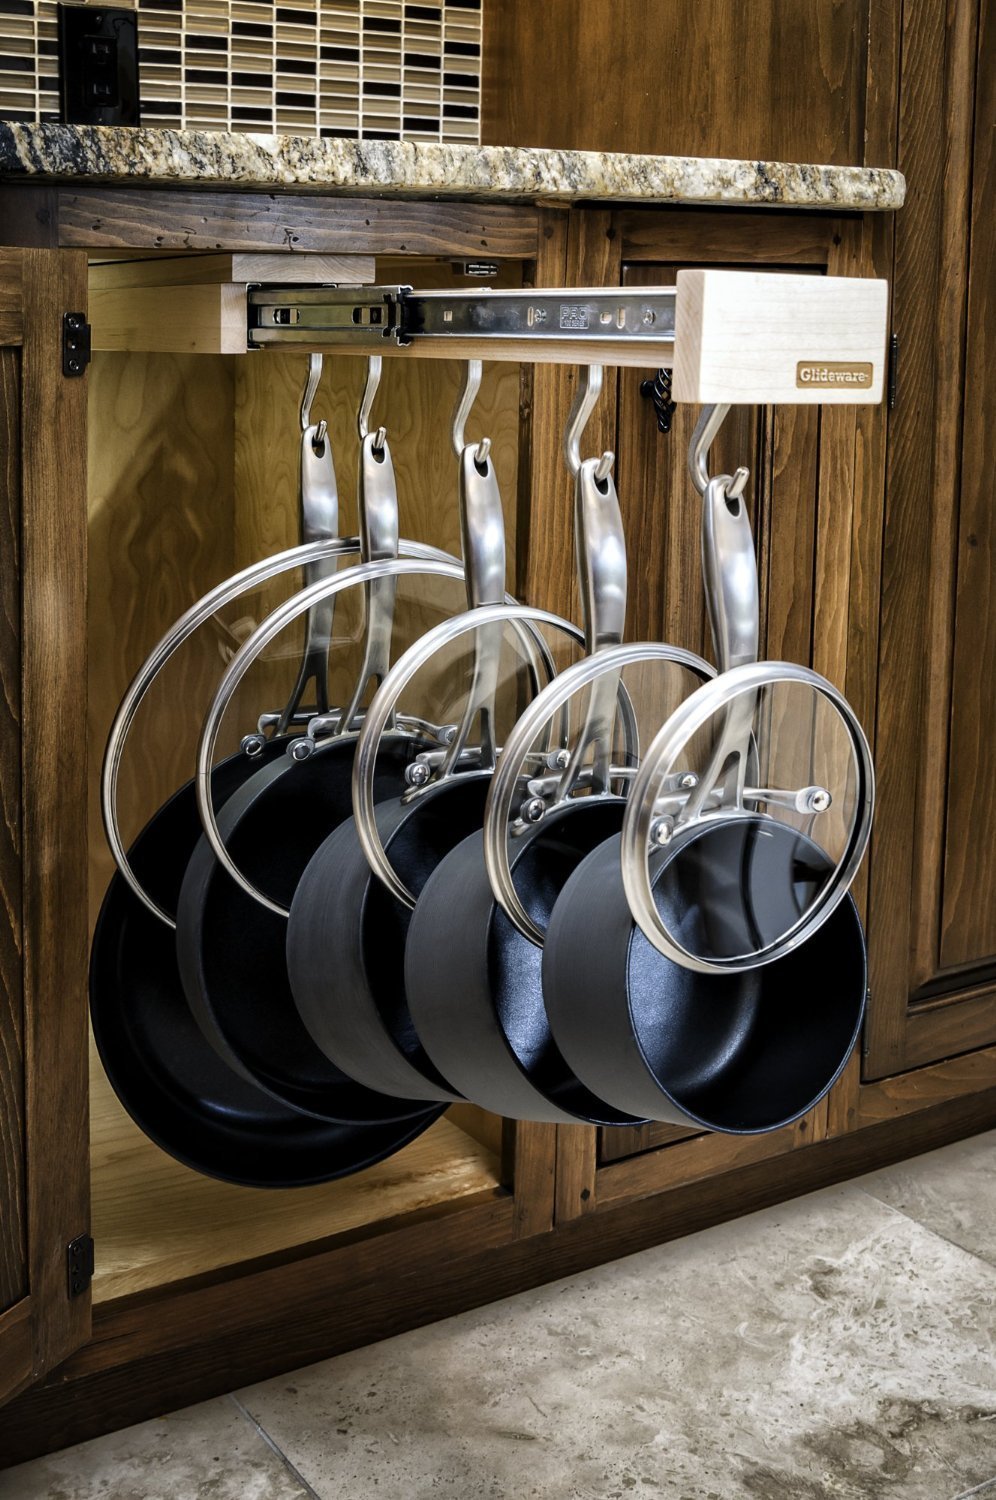 Glideware pull out pots and pans organizer {featured on Home Storage Solutions 101}